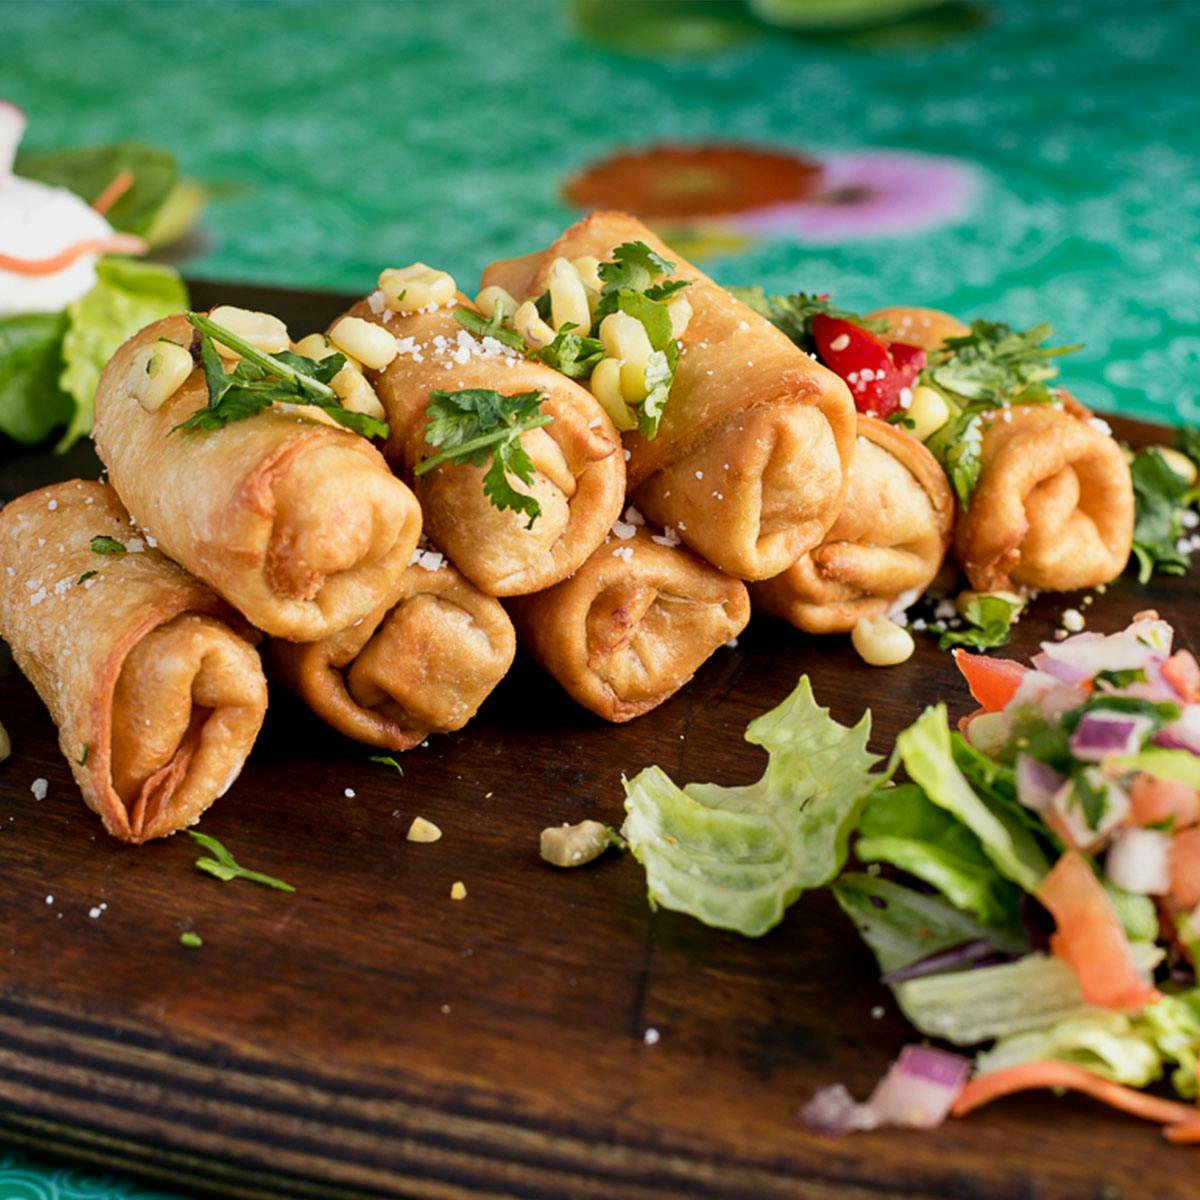 Chimichangas - MEXICAN RESTAURANT - GREEN BAY MEXICAN CUISINE